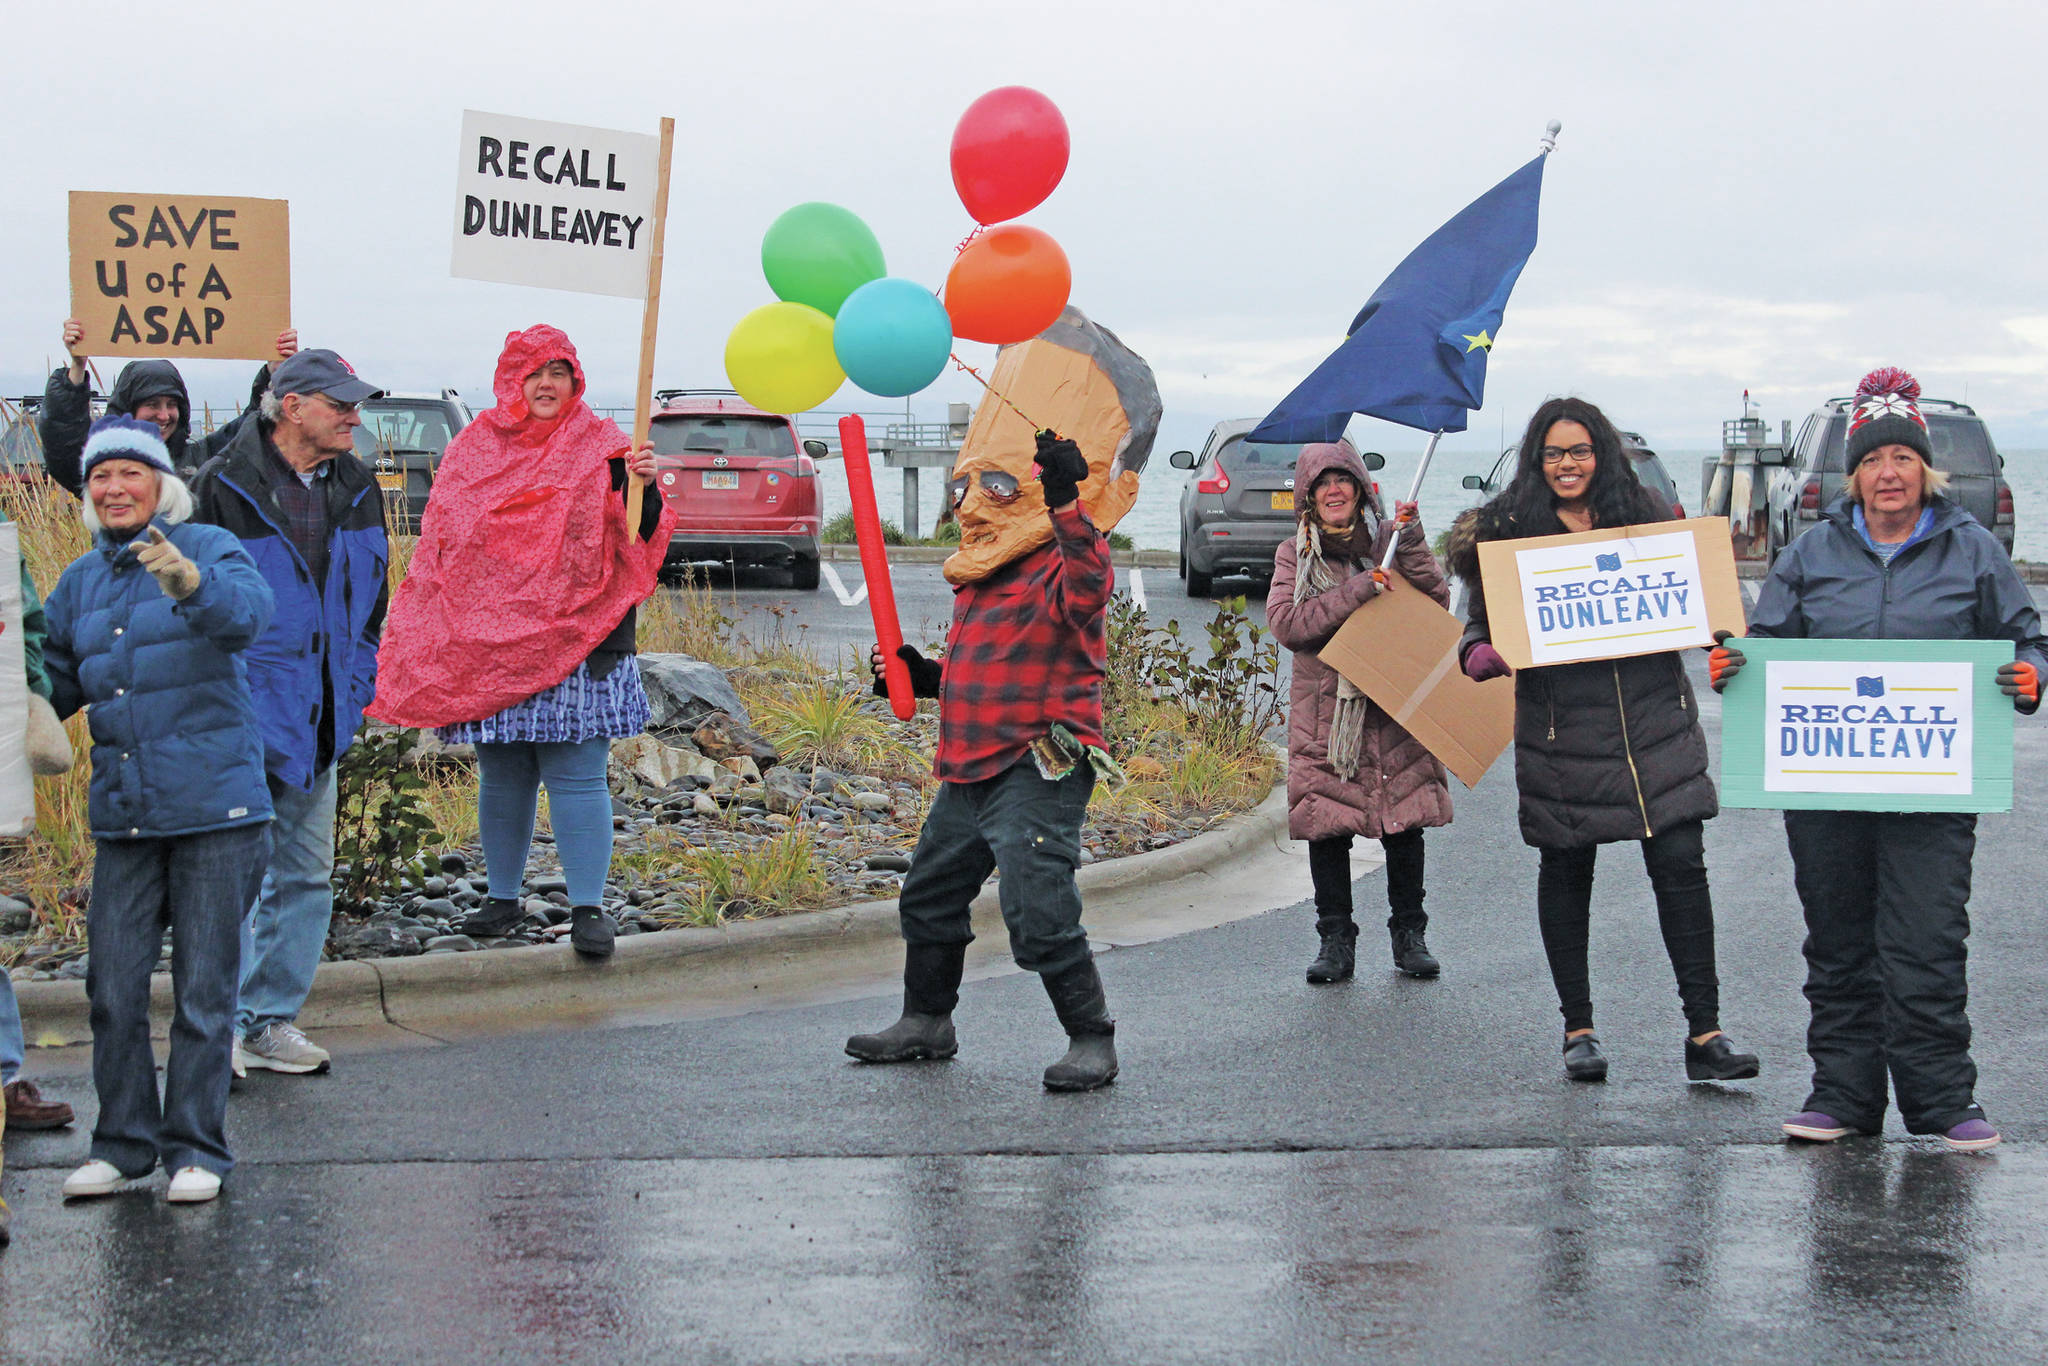 Local supporters of the effort to recall Gov. Mike Dunleavy protest outside the Land’s End Resort where he gave a brief presentation on the statewide economy at a conference held by the Alaska State Home Building Association and the Kenai Peninsula Home Builders Association on Thursday, Oct. 17, 2019 in Homer, Alaska. (Photo by Megan Pacer/Homer News)